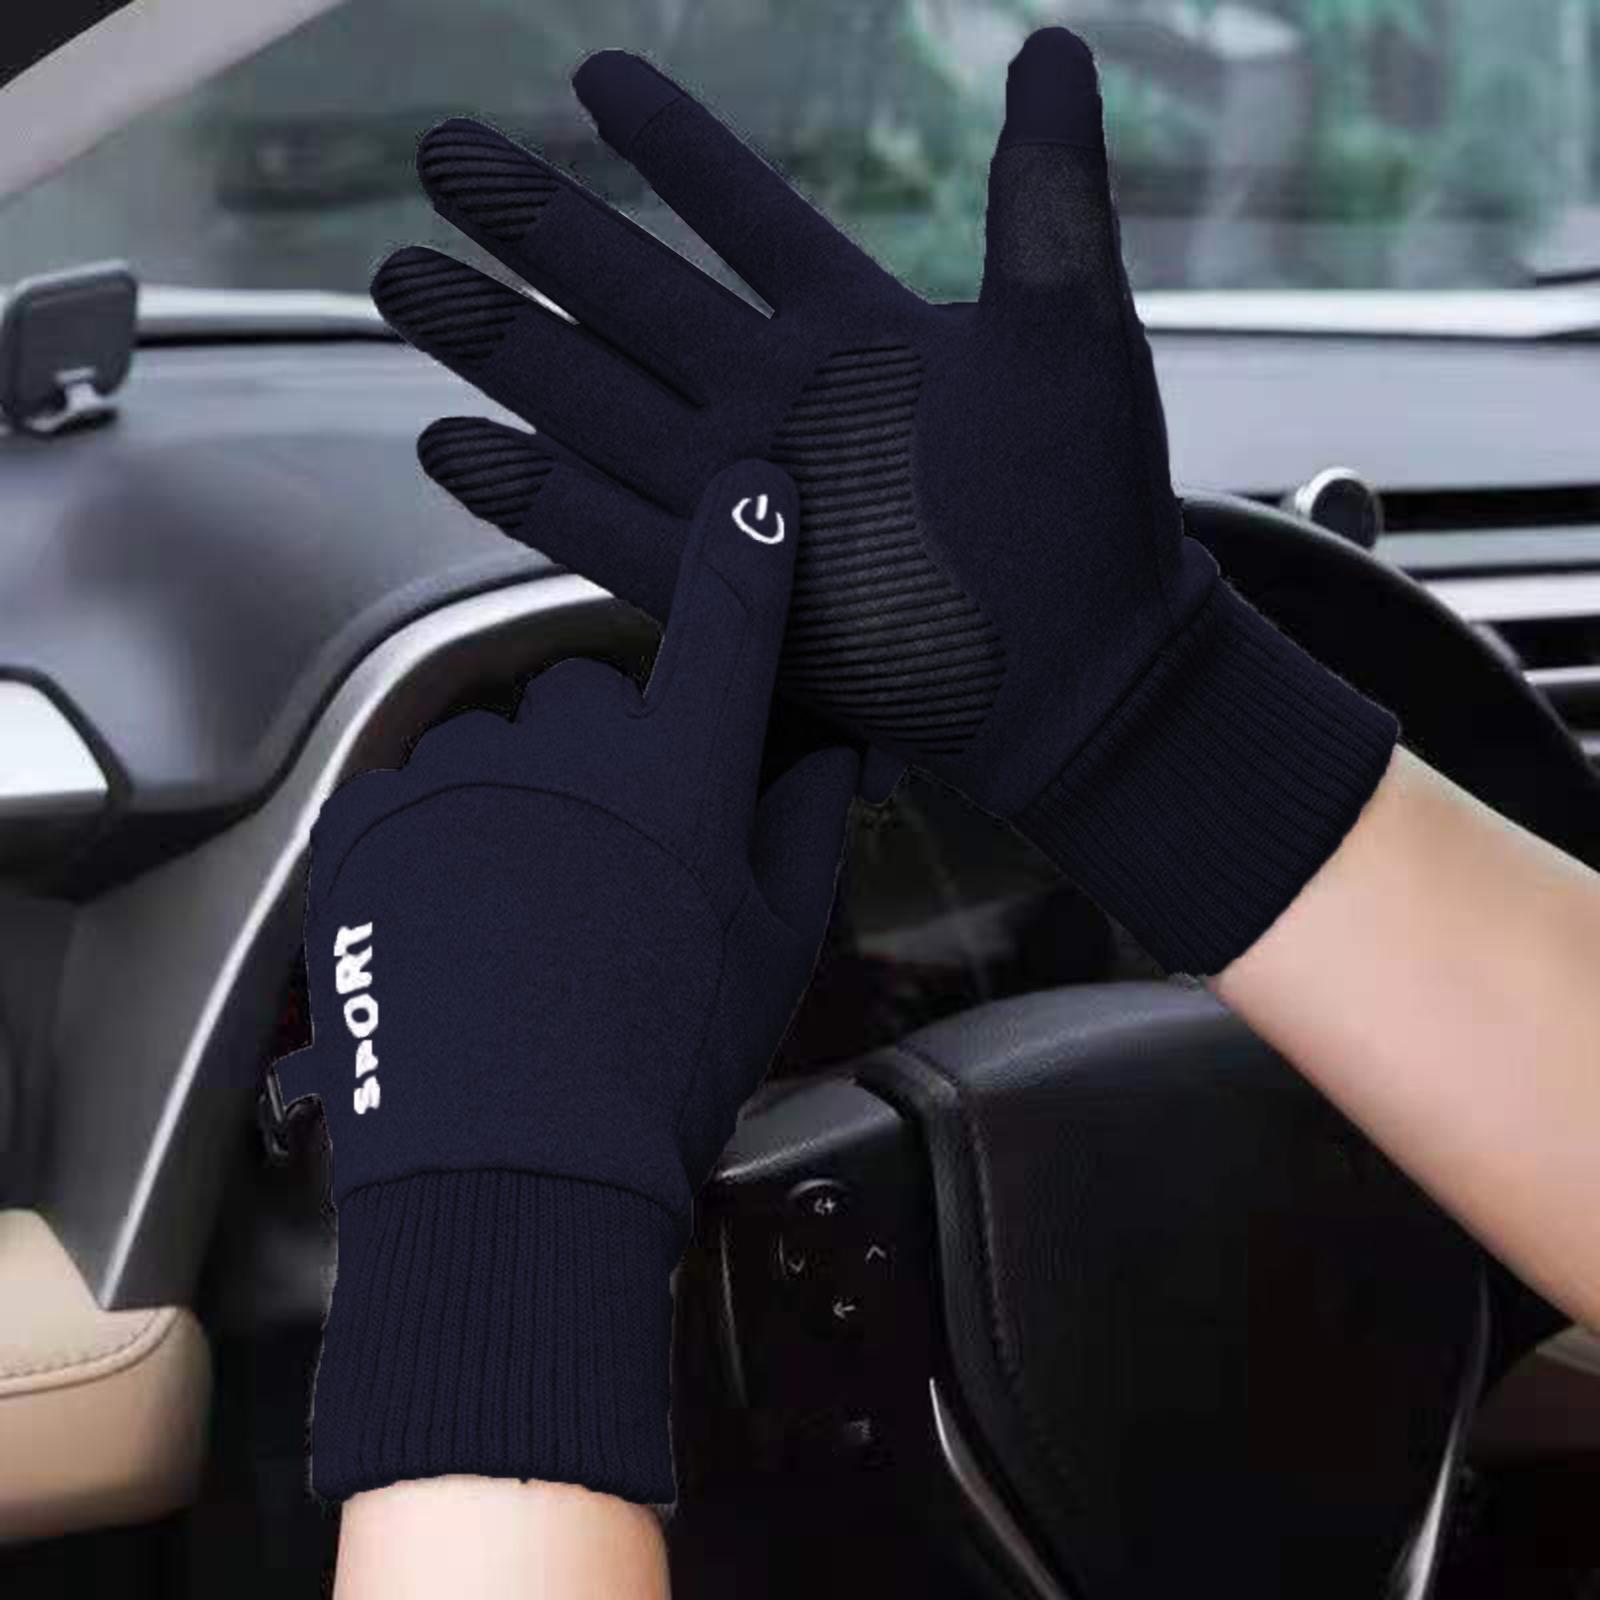 Thermal Gloves Commuting Winter Gloves for Driving Outdoor Sports Riding Dark Blue Large